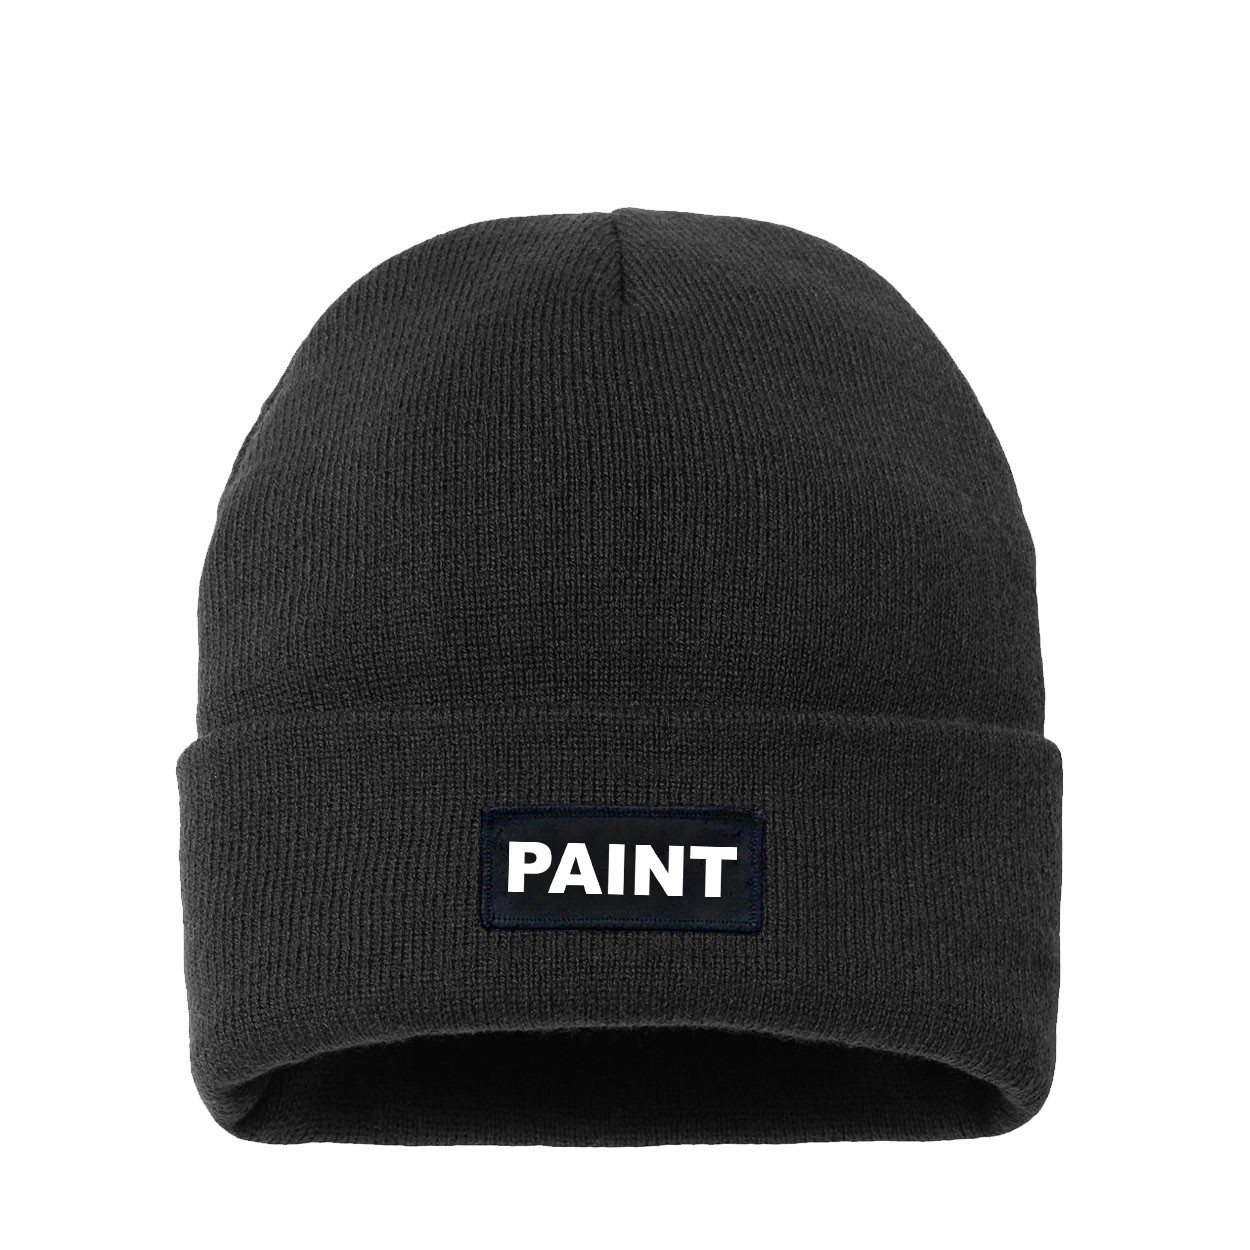 Paint Brand Logo Night Out Woven Patch Night Out Sherpa Lined Cuffed Beanie Black